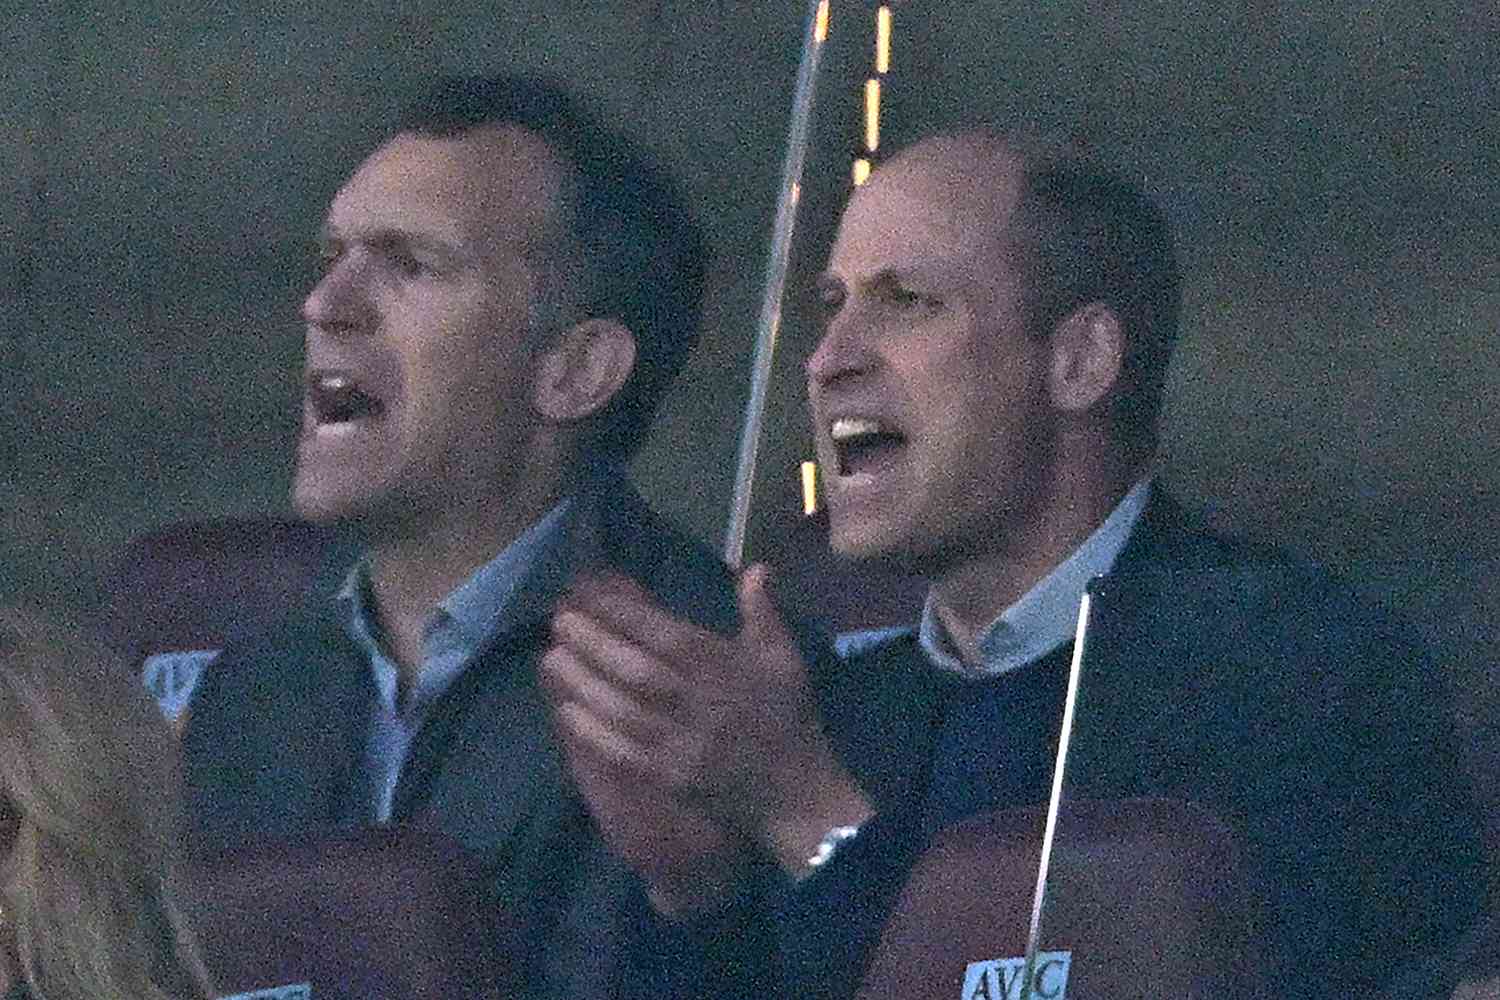 Prince William Watches Soccer as Source Says He’s Buoyed by Sport amid Trying Times [Video]